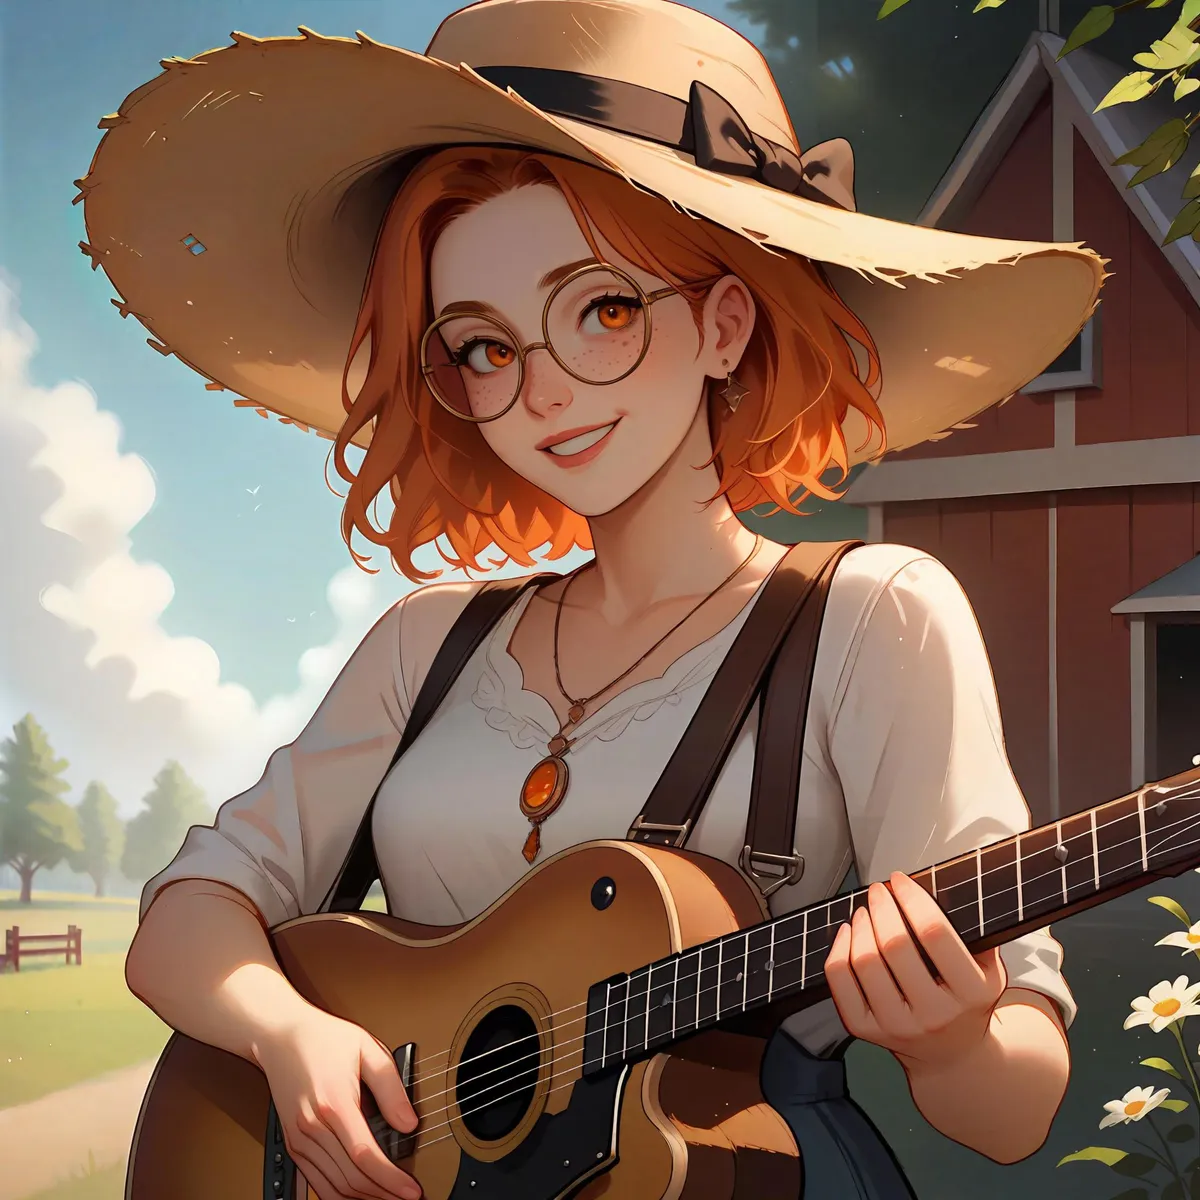 A woman with orange hair and glasses playing a guitar, wearing a large sunhat and a pendant necklace. She is standing beside a farmhouse on a sunny day. This is an AI generated image using Stable Diffusion.